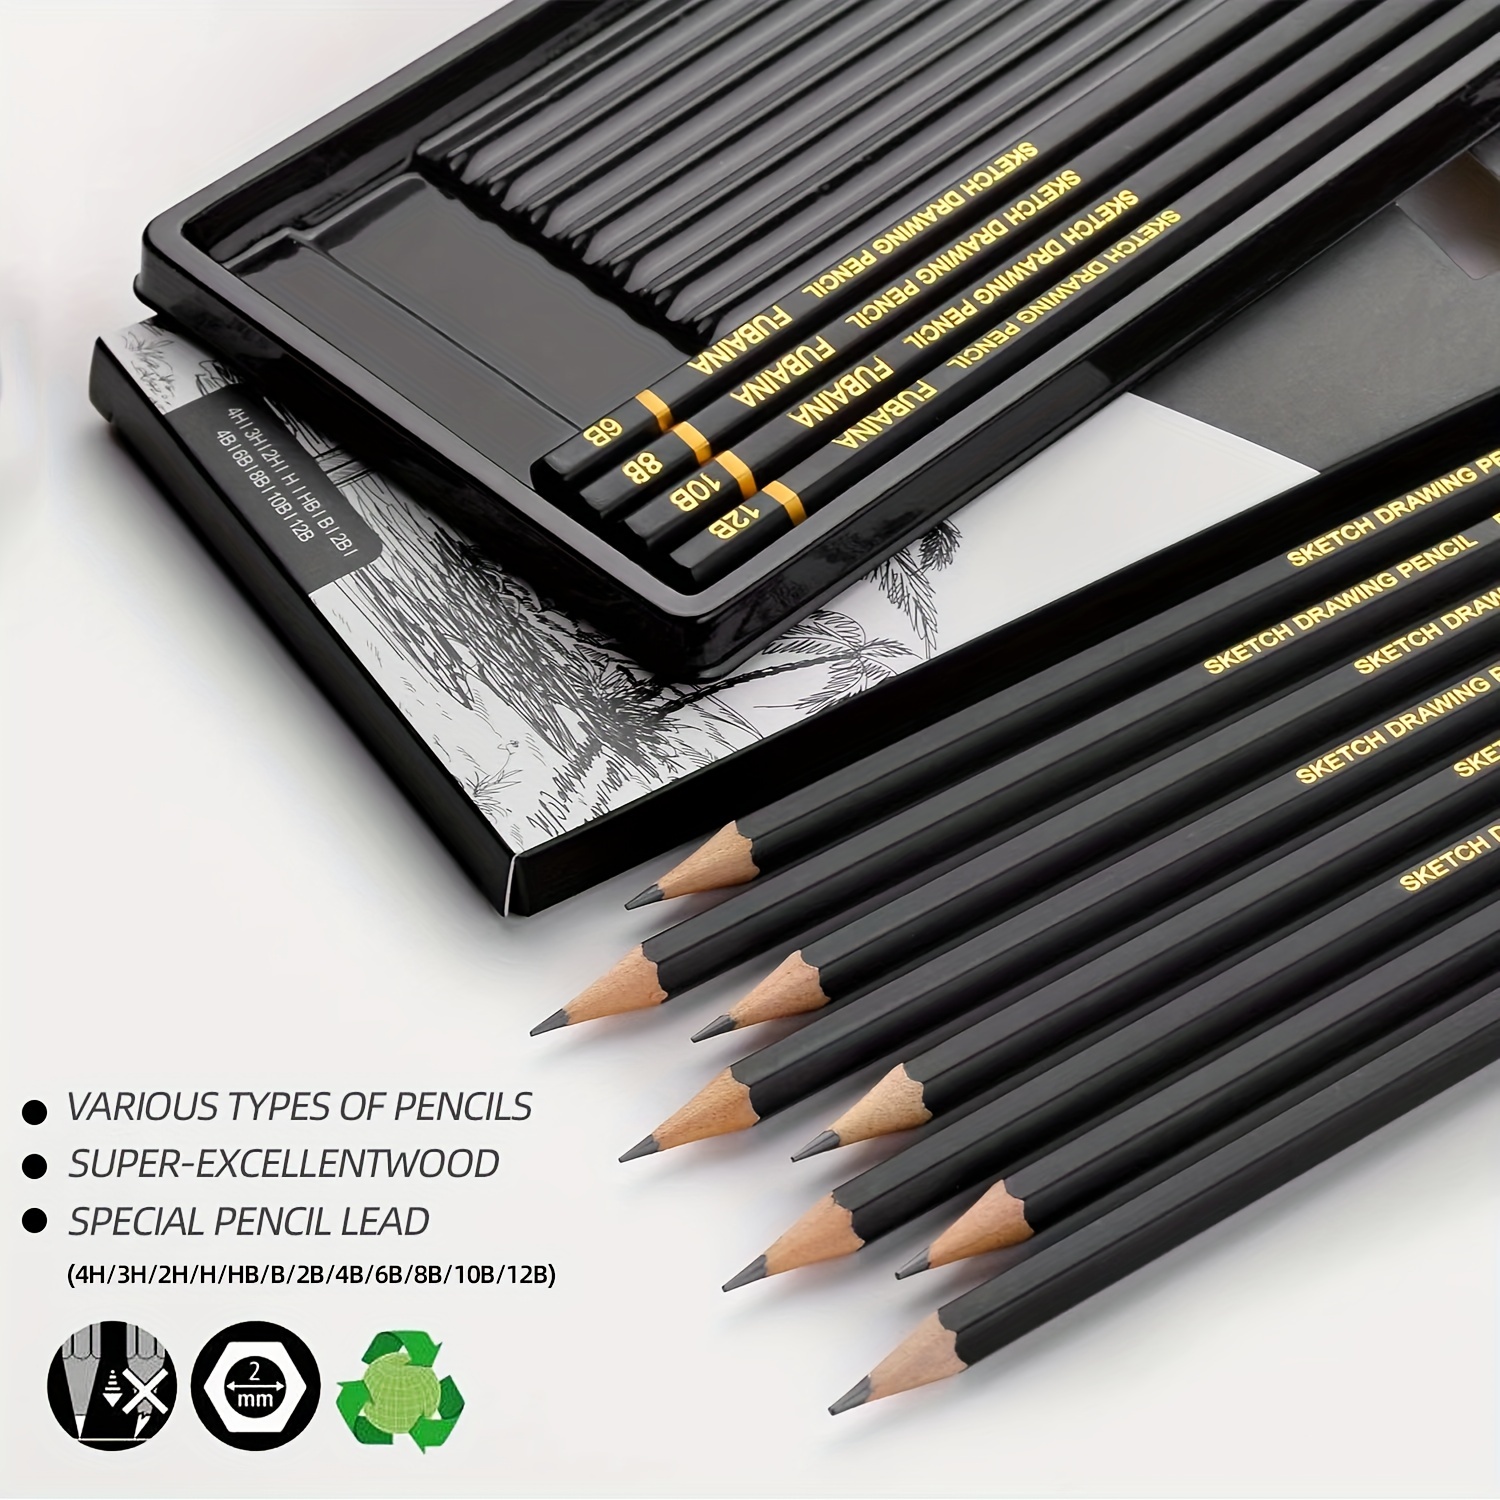 Kalour 70pcs Deluxe Sketching and Drawing Set, Art Supplies, Graphite  Drawing Pencils and Sketch Set, Sketching Tools In Tin Box